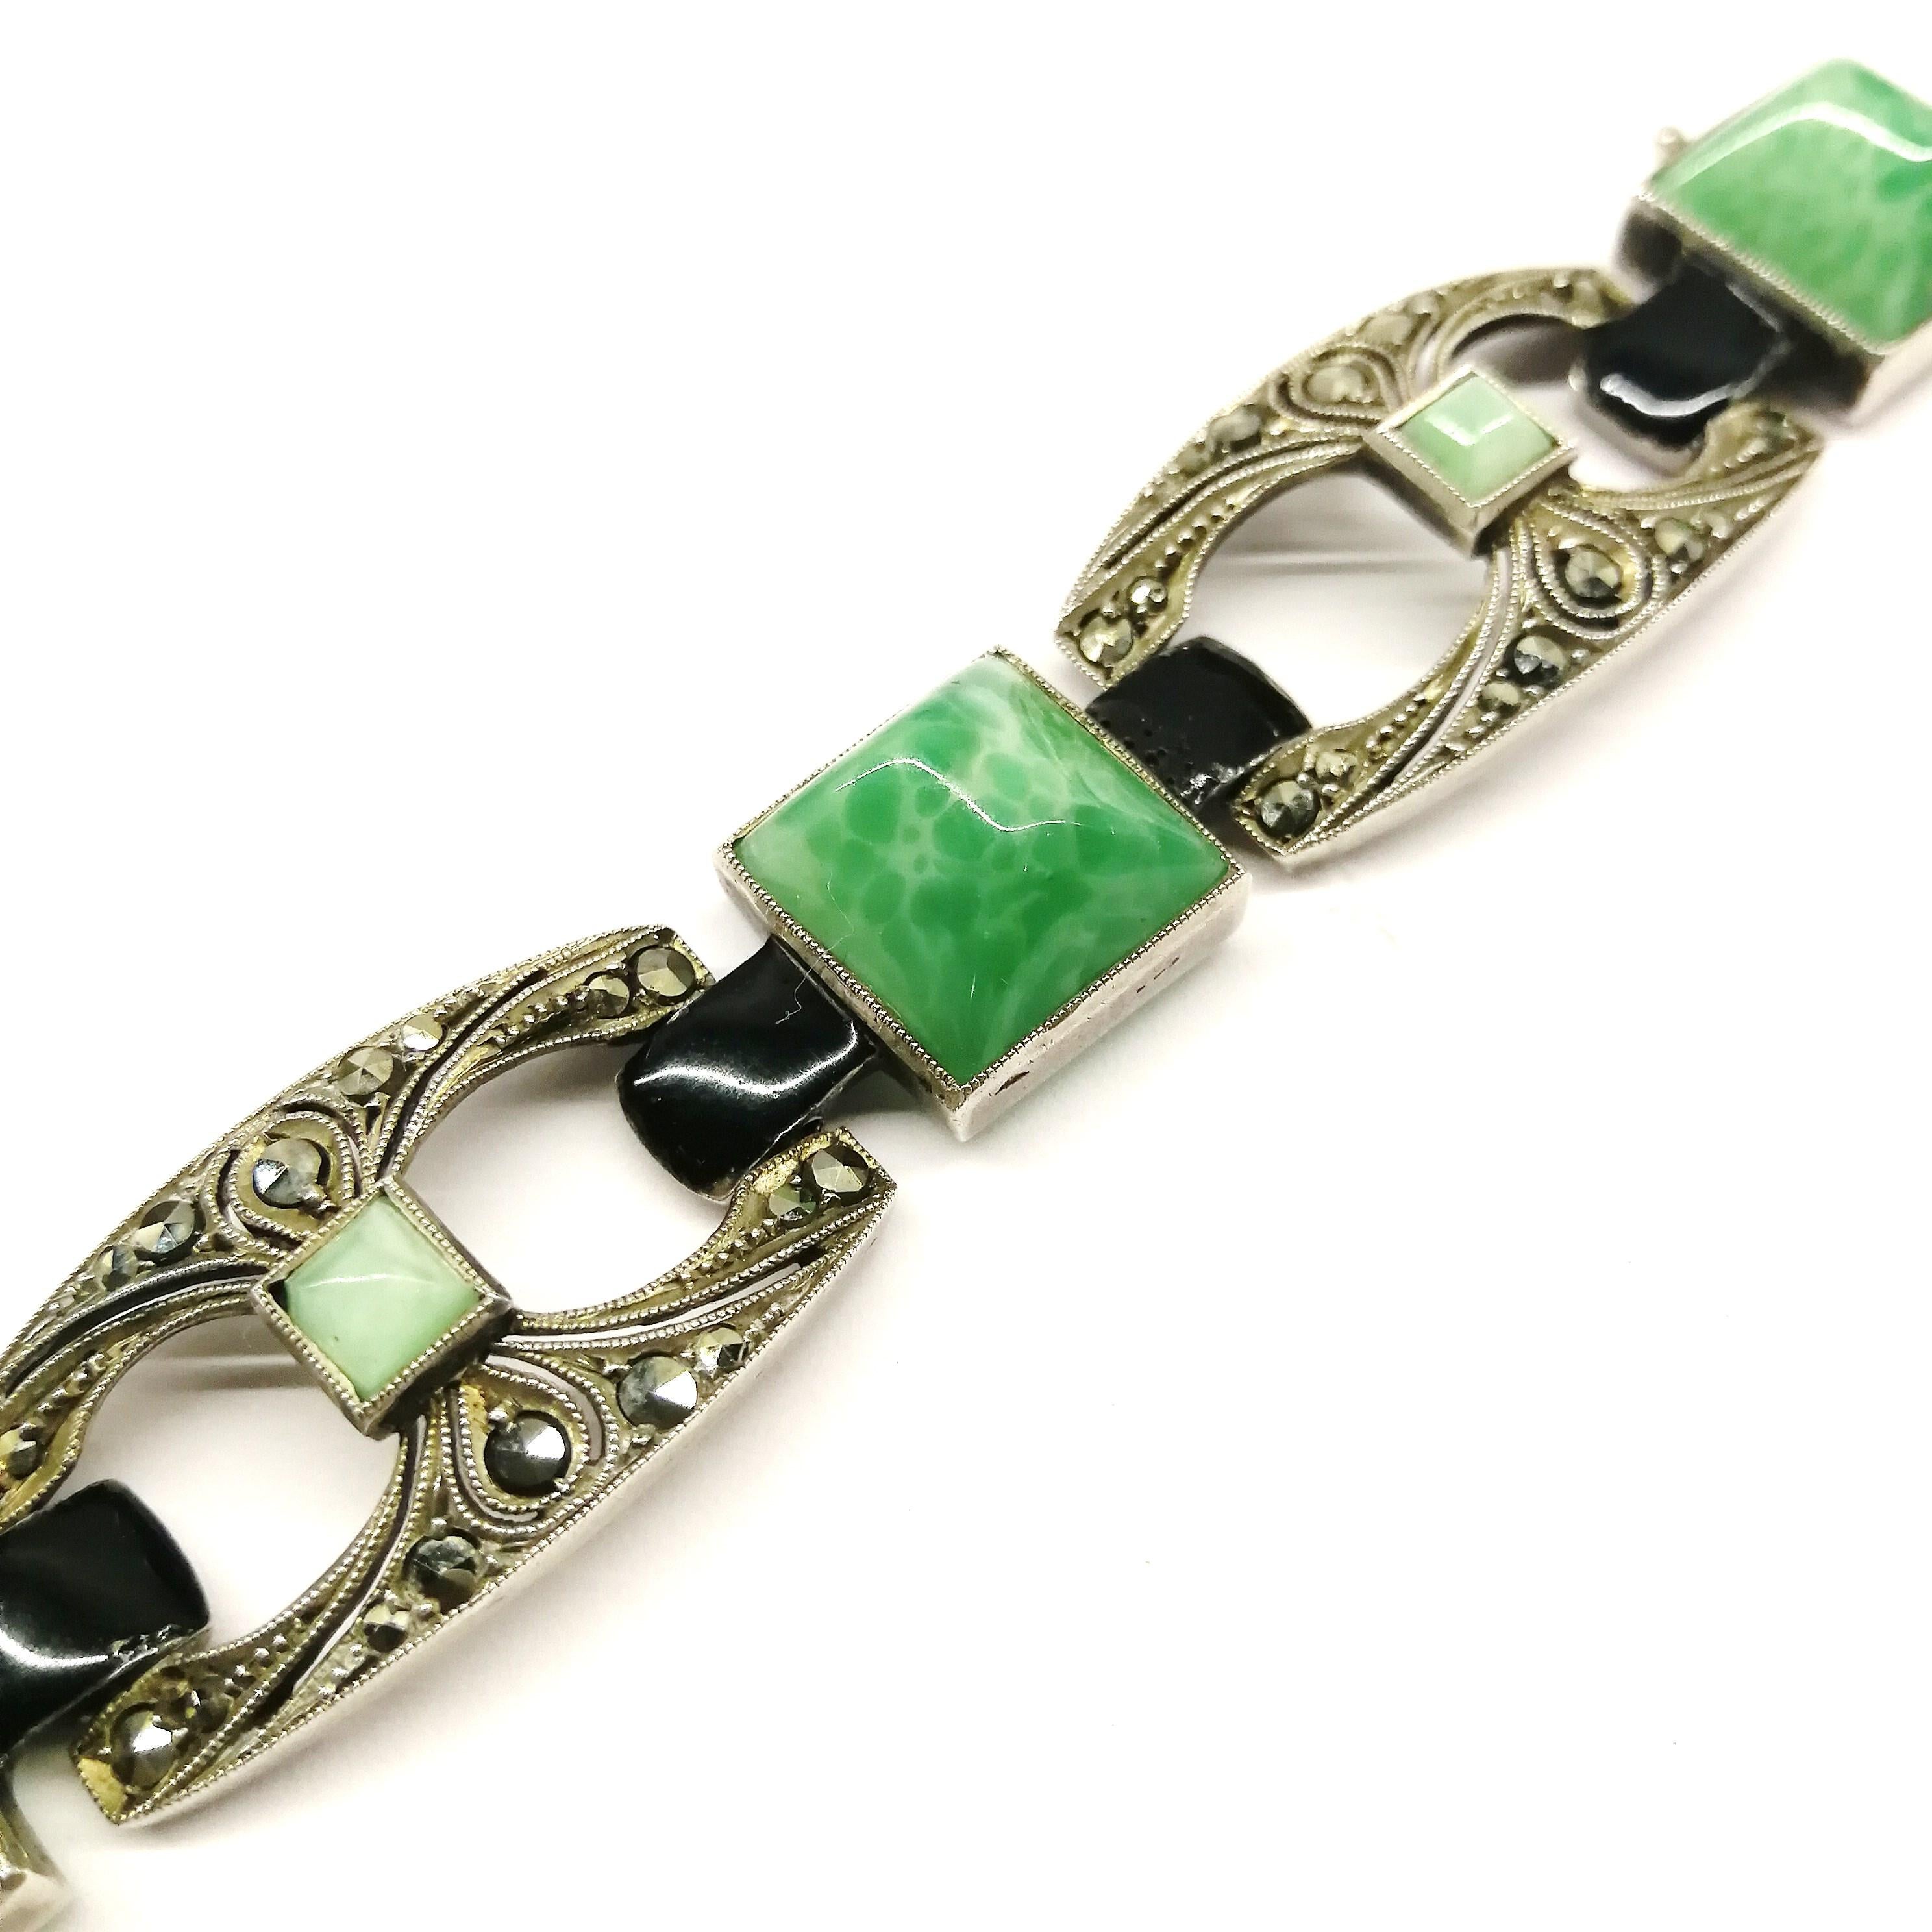 A very stylised Art Deco bracelet, both in style and colourway, semi precious stones , marcasite and black enamel stones set in sterling silver. The maker is unknown, but the bracelet originates from Germany, in the 1930s, where much of the high